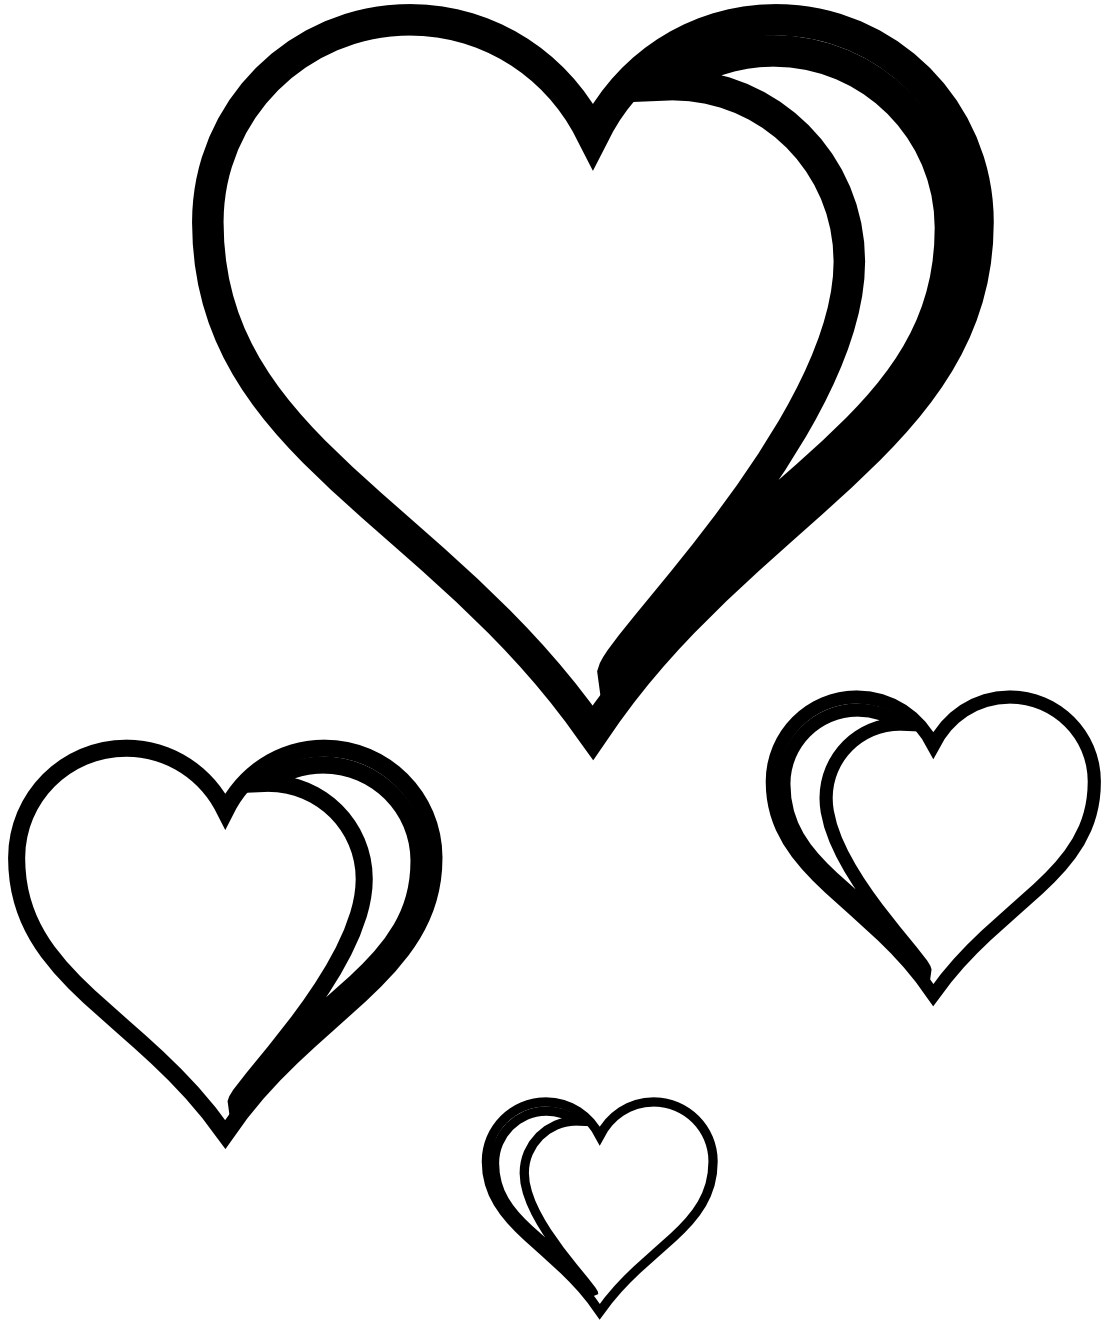 Heart clipart free black and white